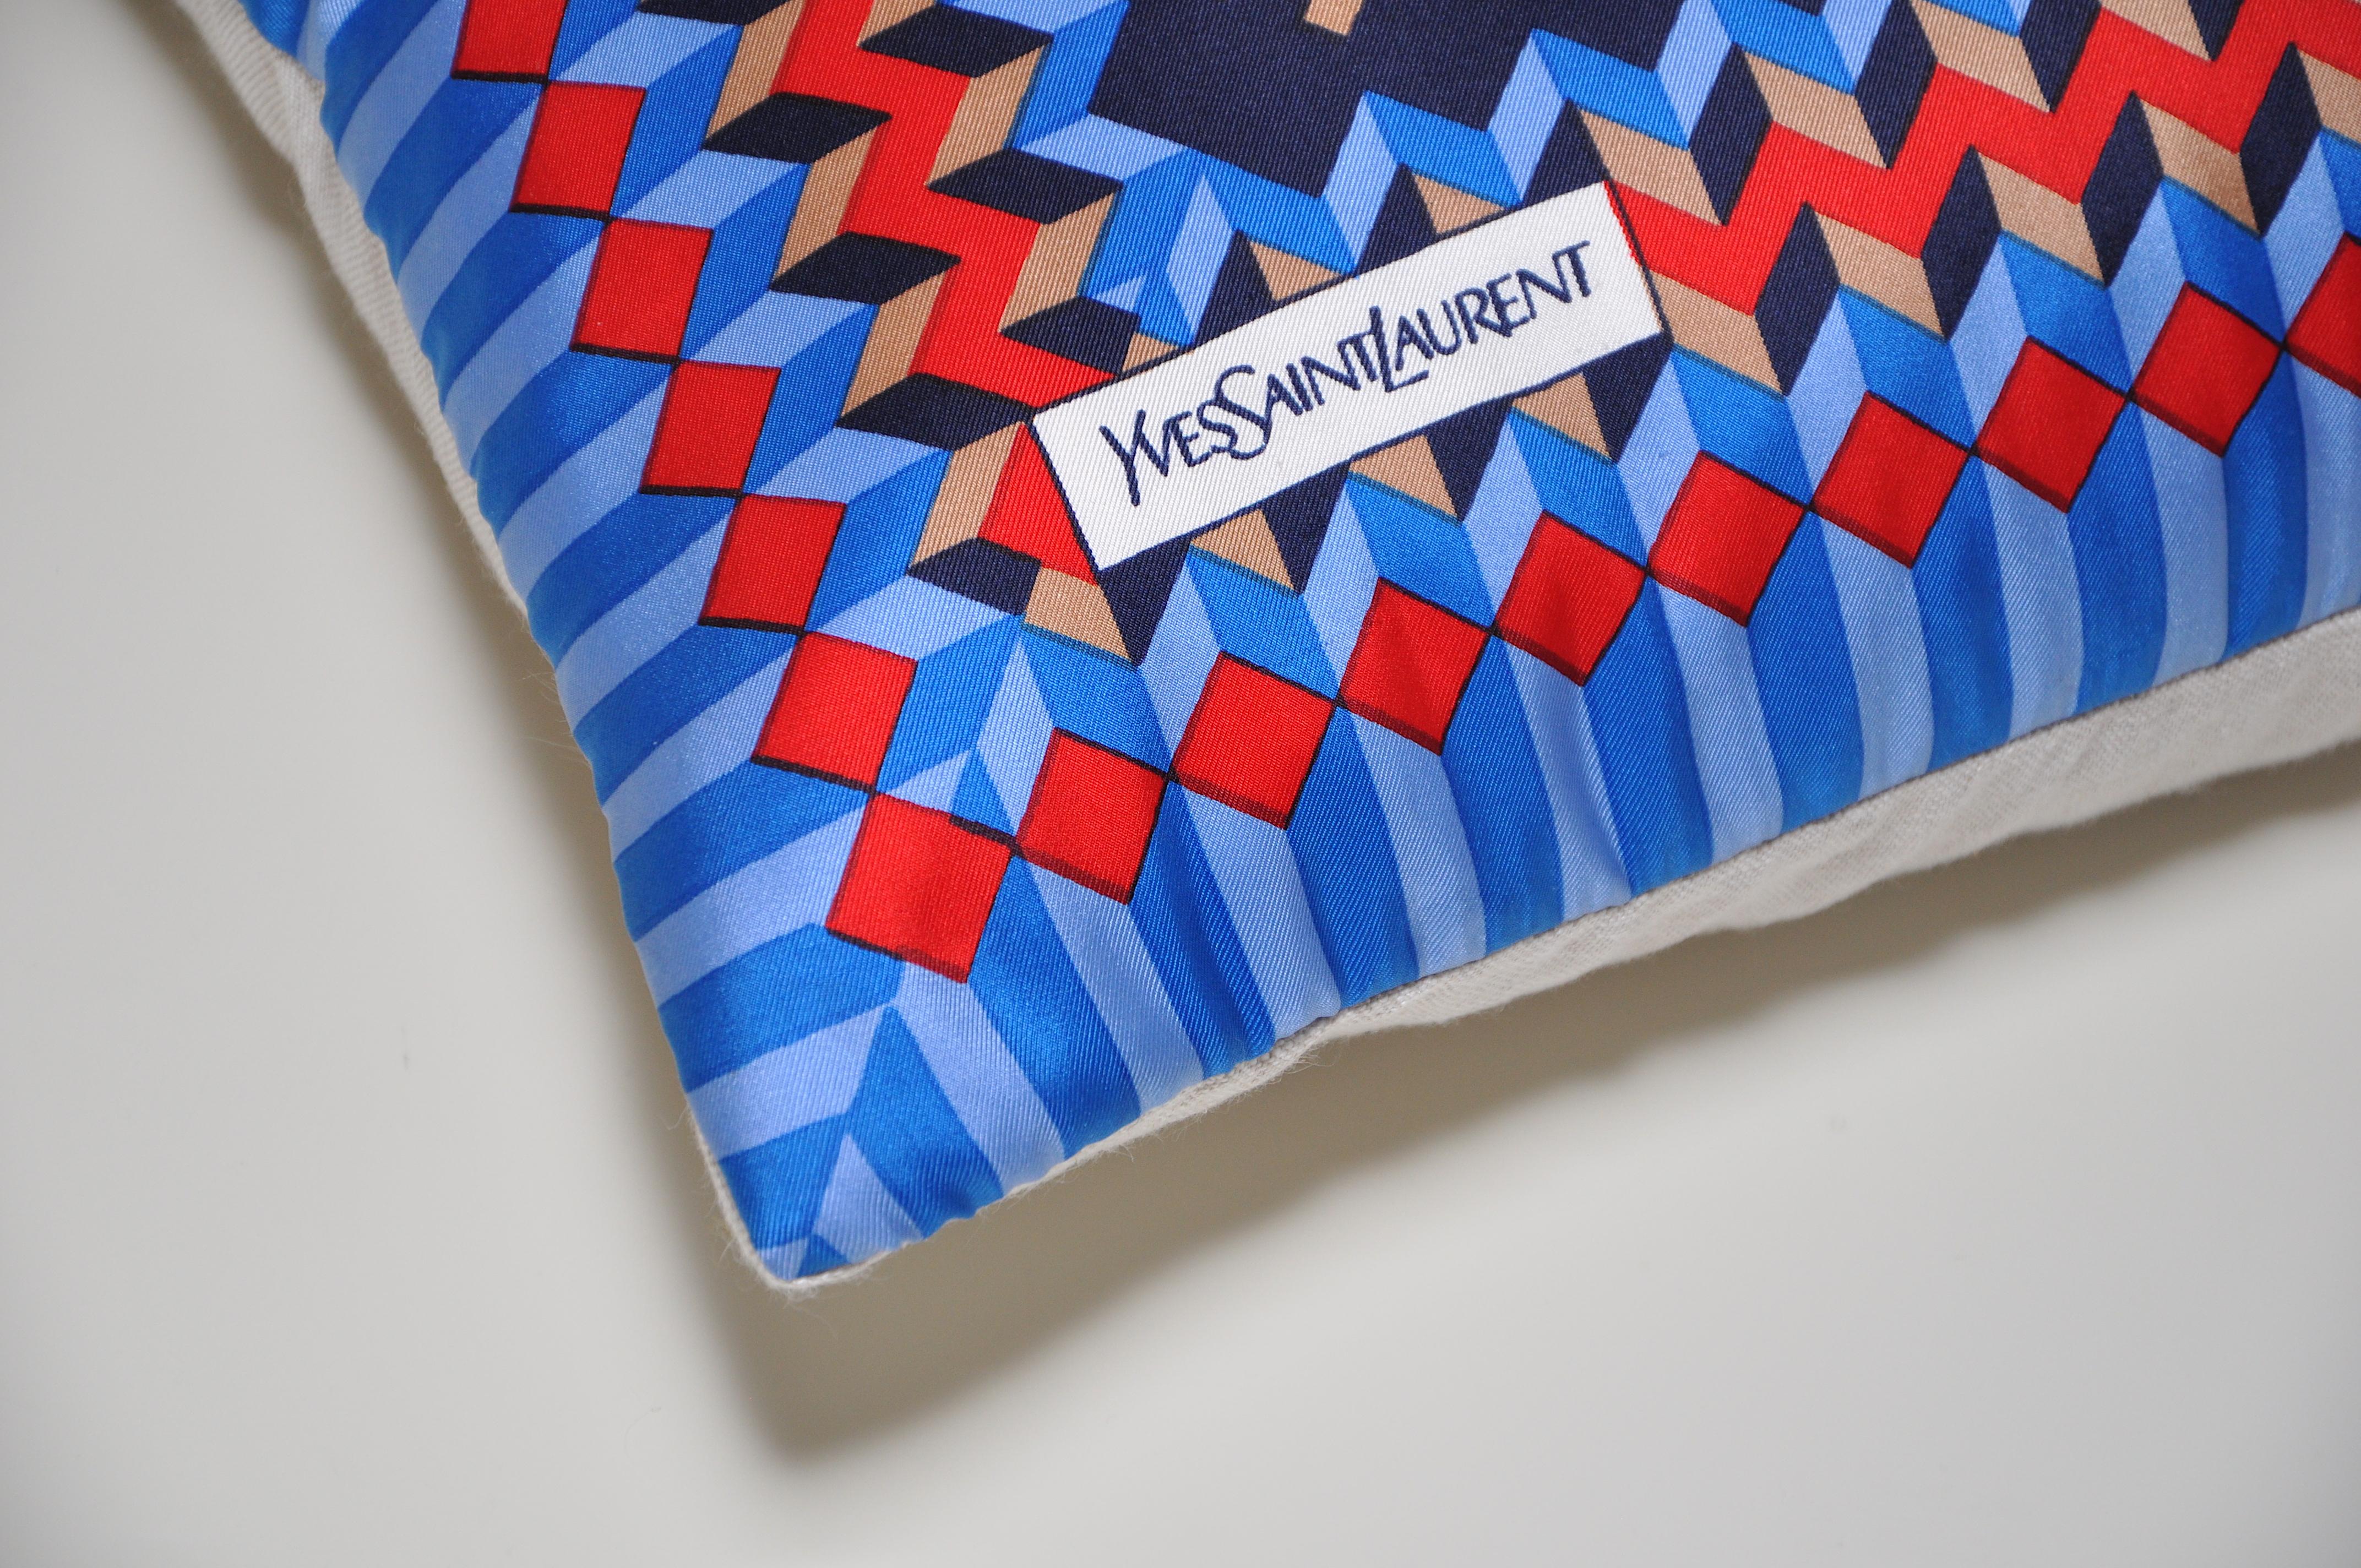 Vintage geometric red blue YSL fabric cushion with Irish linen pillow

This cushion is a one-of-a-kind and part of a sustainability project. 
It has been created from an up-cycled, recycled luxury fabric, used with the intentions of promoting a